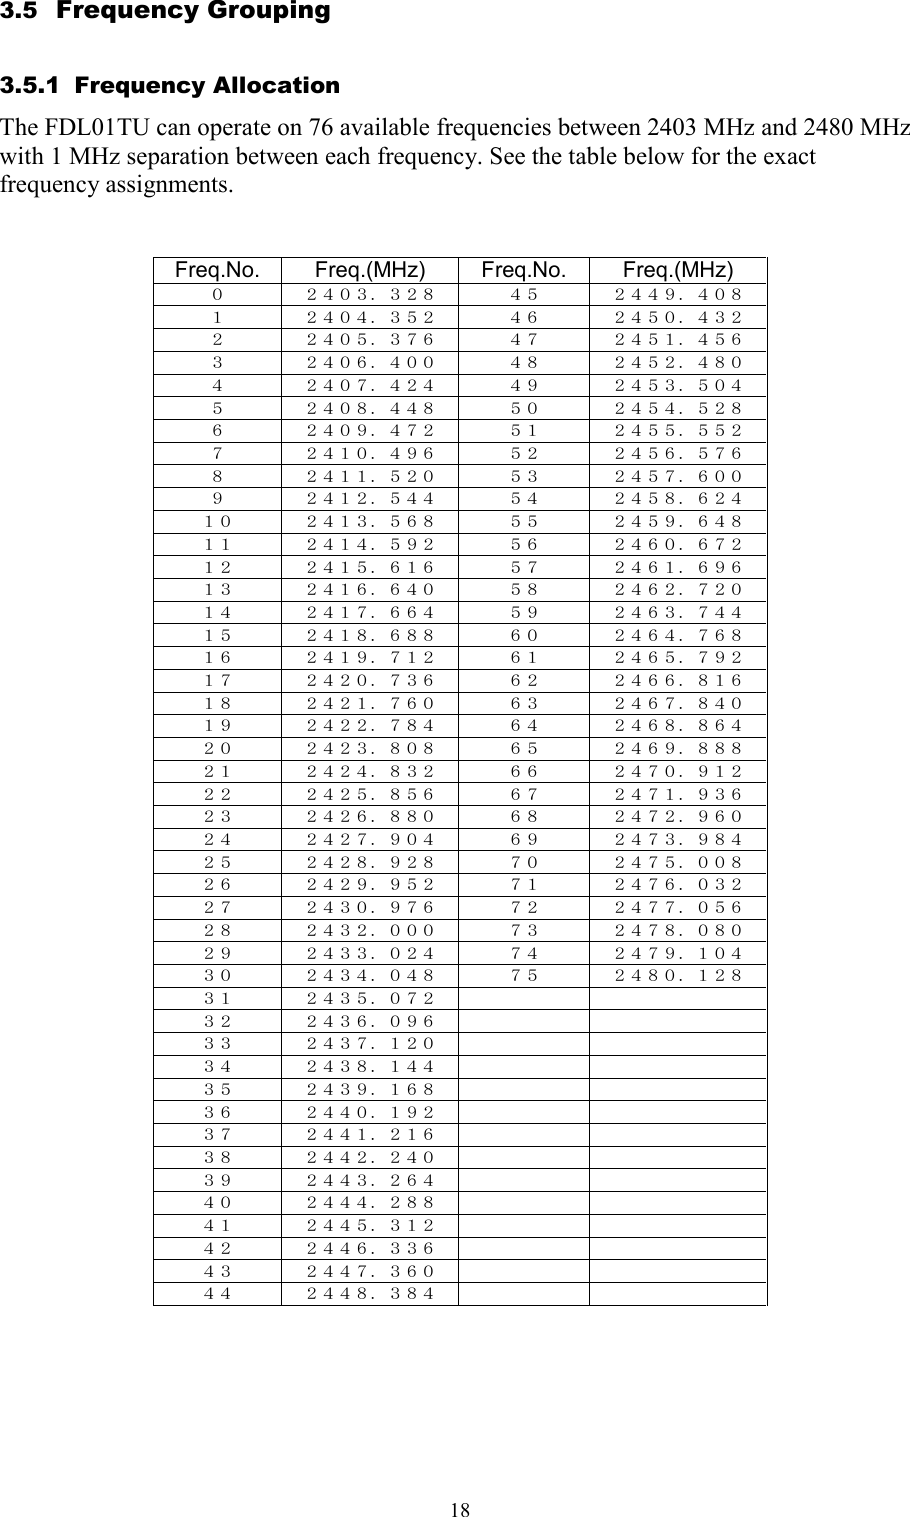   183.5  Frequency Grouping 3.5.1  Frequency Allocation The FDL01TU can operate on 76 available frequencies between 2403 MHz and 2480 MHz with 1 MHz separation between each frequency. See the table below for the exact frequency assignments.   Freq.No.  Freq.(MHz)  Freq.No.  Freq.(MHz) ０ ２４０３．３２８ ４５ ２４４９．４０８ １ ２４０４．３５２ ４６ ２４５０．４３２ ２ ２４０５．３７６ ４７ ２４５１．４５６ ３ ２４０６．４００ ４８ ２４５２．４８０ ４ ２４０７．４２４ ４９ ２４５３．５０４ ５ ２４０８．４４８ ５０ ２４５４．５２８ ６ ２４０９．４７２ ５１ ２４５５．５５２ ７ ２４１０．４９６ ５２ ２４５６．５７６ ８ ２４１１．５２０ ５３ ２４５７．６００ ９ ２４１２．５４４ ５４ ２４５８．６２４ １０ ２４１３．５６８ ５５ ２４５９．６４８ １１ ２４１４．５９２ ５６ ２４６０．６７２ １２ ２４１５．６１６ ５７ ２４６１．６９６ １３ ２４１６．６４０ ５８ ２４６２．７２０ １４ ２４１７．６６４ ５９ ２４６３．７４４ １５ ２４１８．６８８ ６０ ２４６４．７６８ １６ ２４１９．７１２ ６１ ２４６５．７９２ １７ ２４２０．７３６ ６２ ２４６６．８１６ １８ ２４２１．７６０ ６３ ２４６７．８４０ １９ ２４２２．７８４ ６４ ２４６８．８６４ ２０ ２４２３．８０８ ６５ ２４６９．８８８ ２１ ２４２４．８３２ ６６ ２４７０．９１２ ２２ ２４２５．８５６ ６７ ２４７１．９３６ ２３ ２４２６．８８０ ６８ ２４７２．９６０ ２４ ２４２７．９０４ ６９ ２４７３．９８４ ２５ ２４２８．９２８ ７０ ２４７５．００８ ２６ ２４２９．９５２ ７１ ２４７６．０３２ ２７ ２４３０．９７６ ７２ ２４７７．０５６ ２８ ２４３２．０００ ７３ ２４７８．０８０ ２９ ２４３３．０２４ ７４ ２４７９．１０４ ３０ ２４３４．０４８ ７５ ２４８０．１２８ ３１ ２４３５．０７２    ３２ ２４３６．０９６    ３３ ２４３７．１２０    ３４ ２４３８．１４４    ３５ ２４３９．１６８    ３６ ２４４０．１９２    ３７ ２４４１．２１６    ３８ ２４４２．２４０    ３９ ２４４３．２６４    ４０ ２４４４．２８８    ４１ ２４４５．３１２    ４２ ２４４６．３３６    ４３ ２４４７．３６０    ４４ ２４４８．３８４         